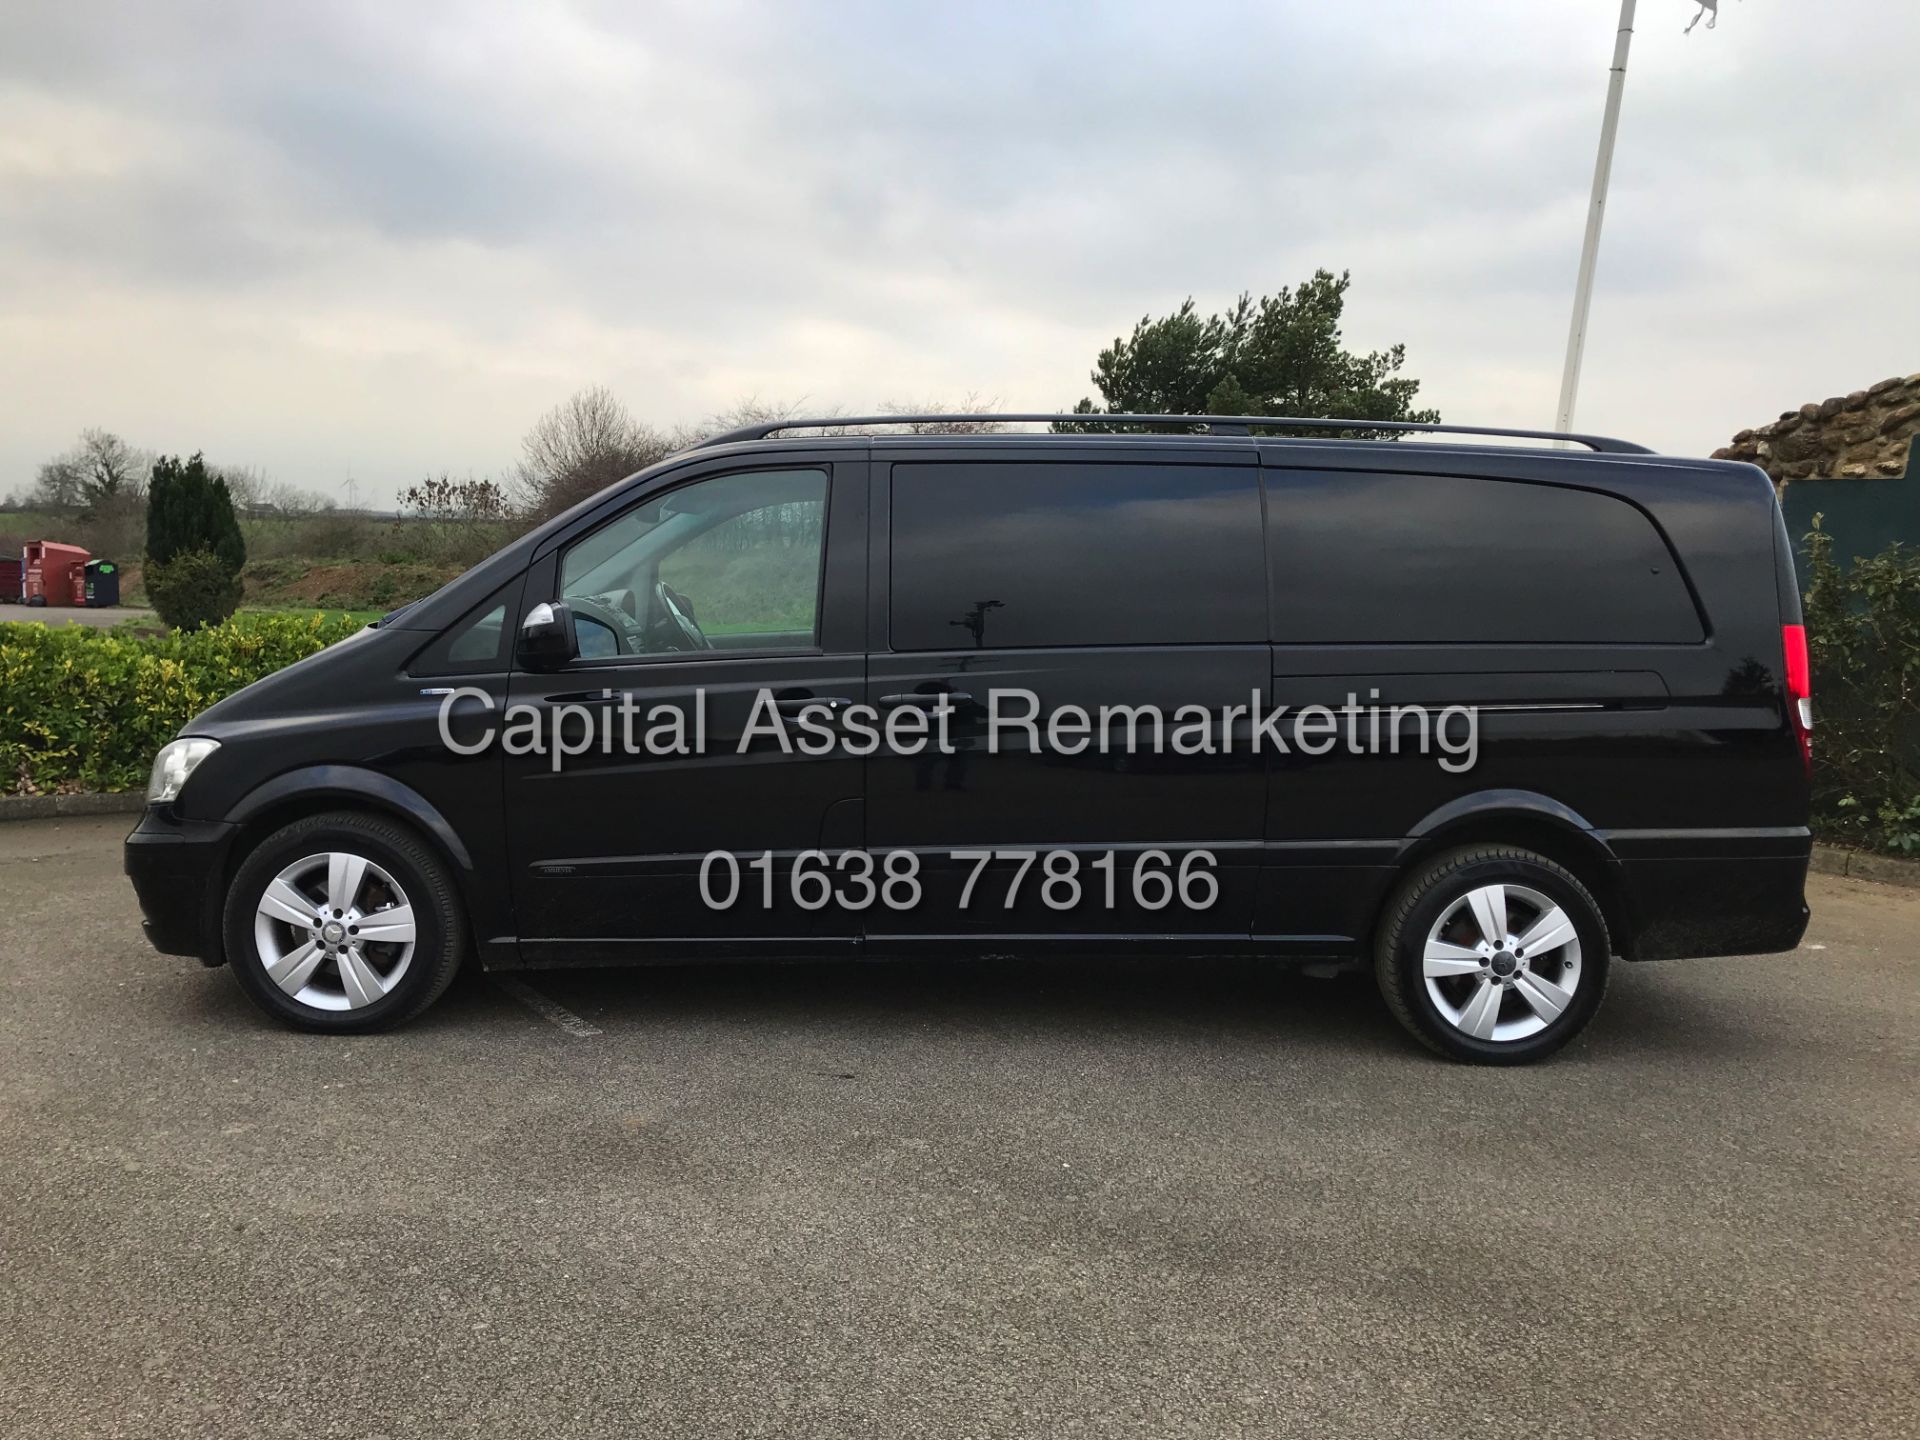 (ON SALE) MERCEDES VIANO 2.2CDI "AMBIENET" XLWB 8 SEATER (14 REG) 1 OWNER - FULLY LOADED - LEATHER - Image 2 of 28